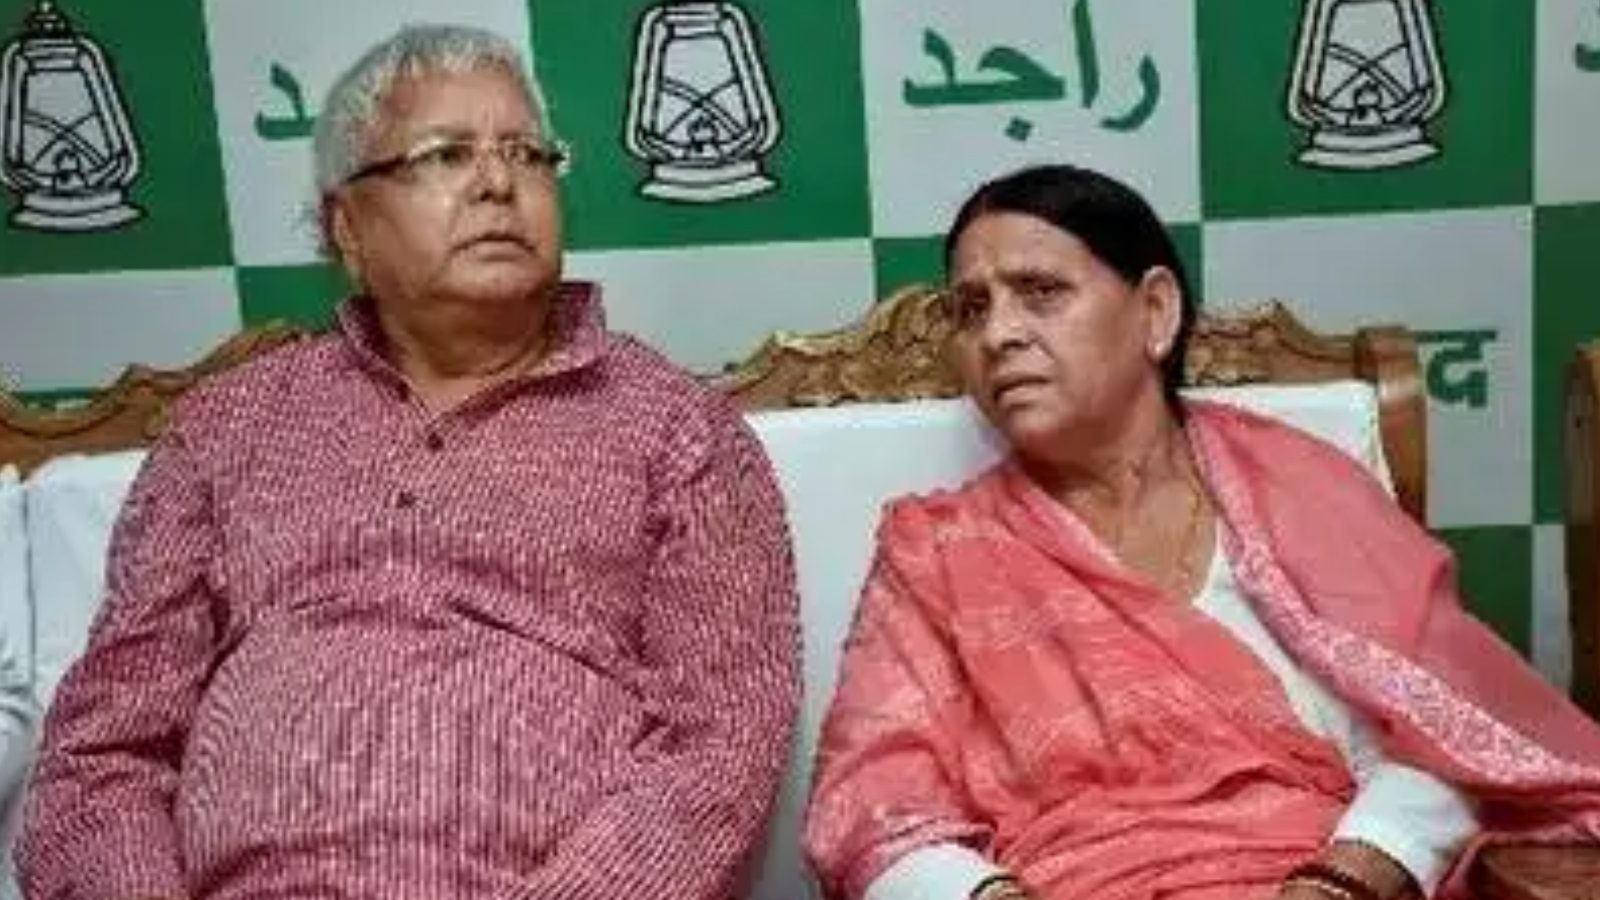 ‘CBI Didn’t Barge In’: Probe Officials Visit Rabri Devi’s Residence in Land for Jobs Scam Case